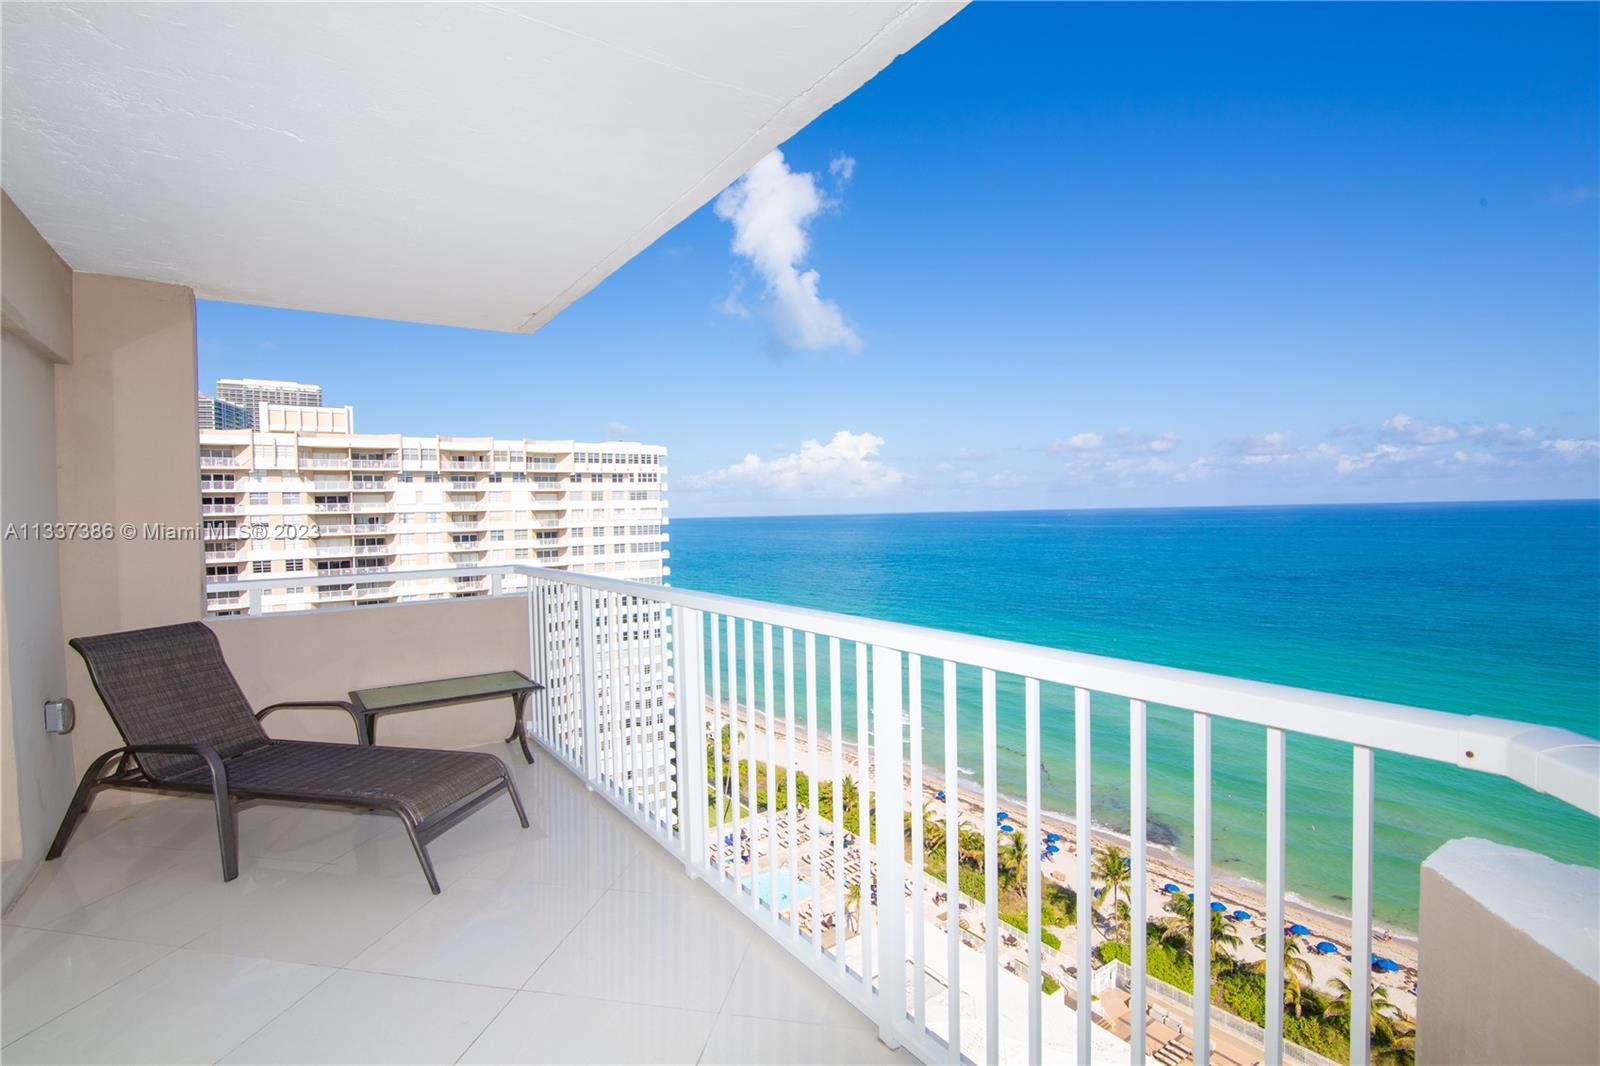 STUNNING CORNER DIRECT OCEANFRONT, 2/2 20TH FLOOR UNIT WITH UNOBSTUCTED VIEWS. THIS VERY LIGHT AND B